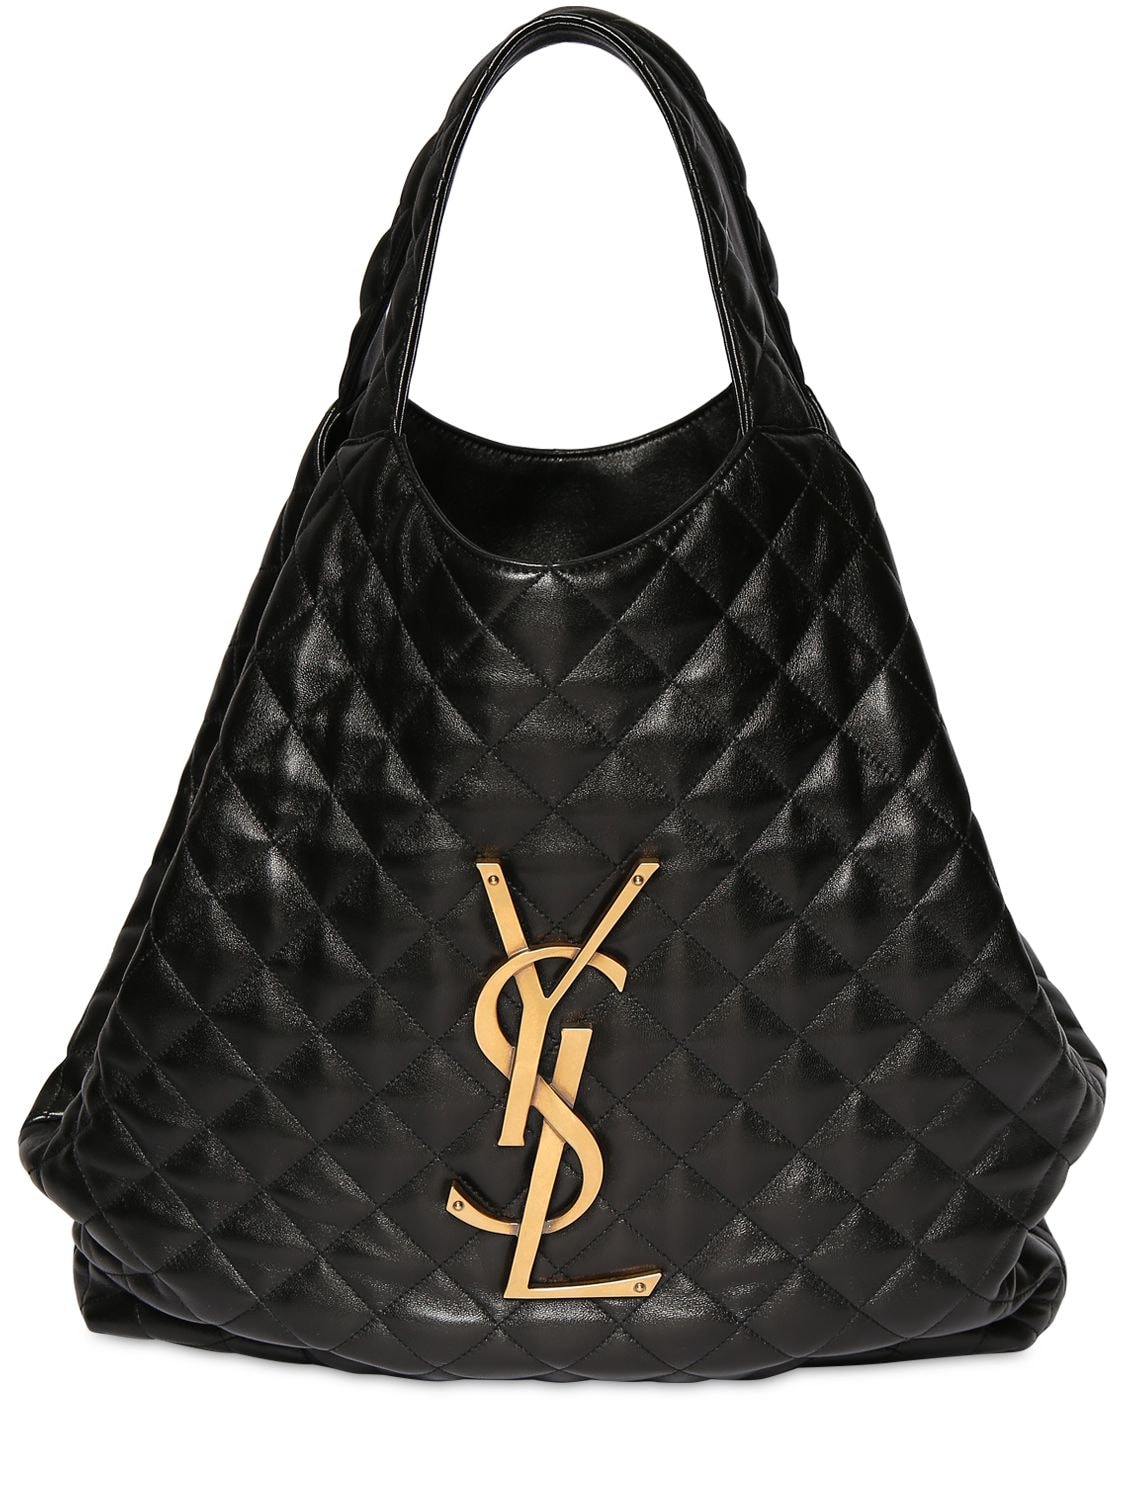 SAINT LAURENT Icare quilted leather tote